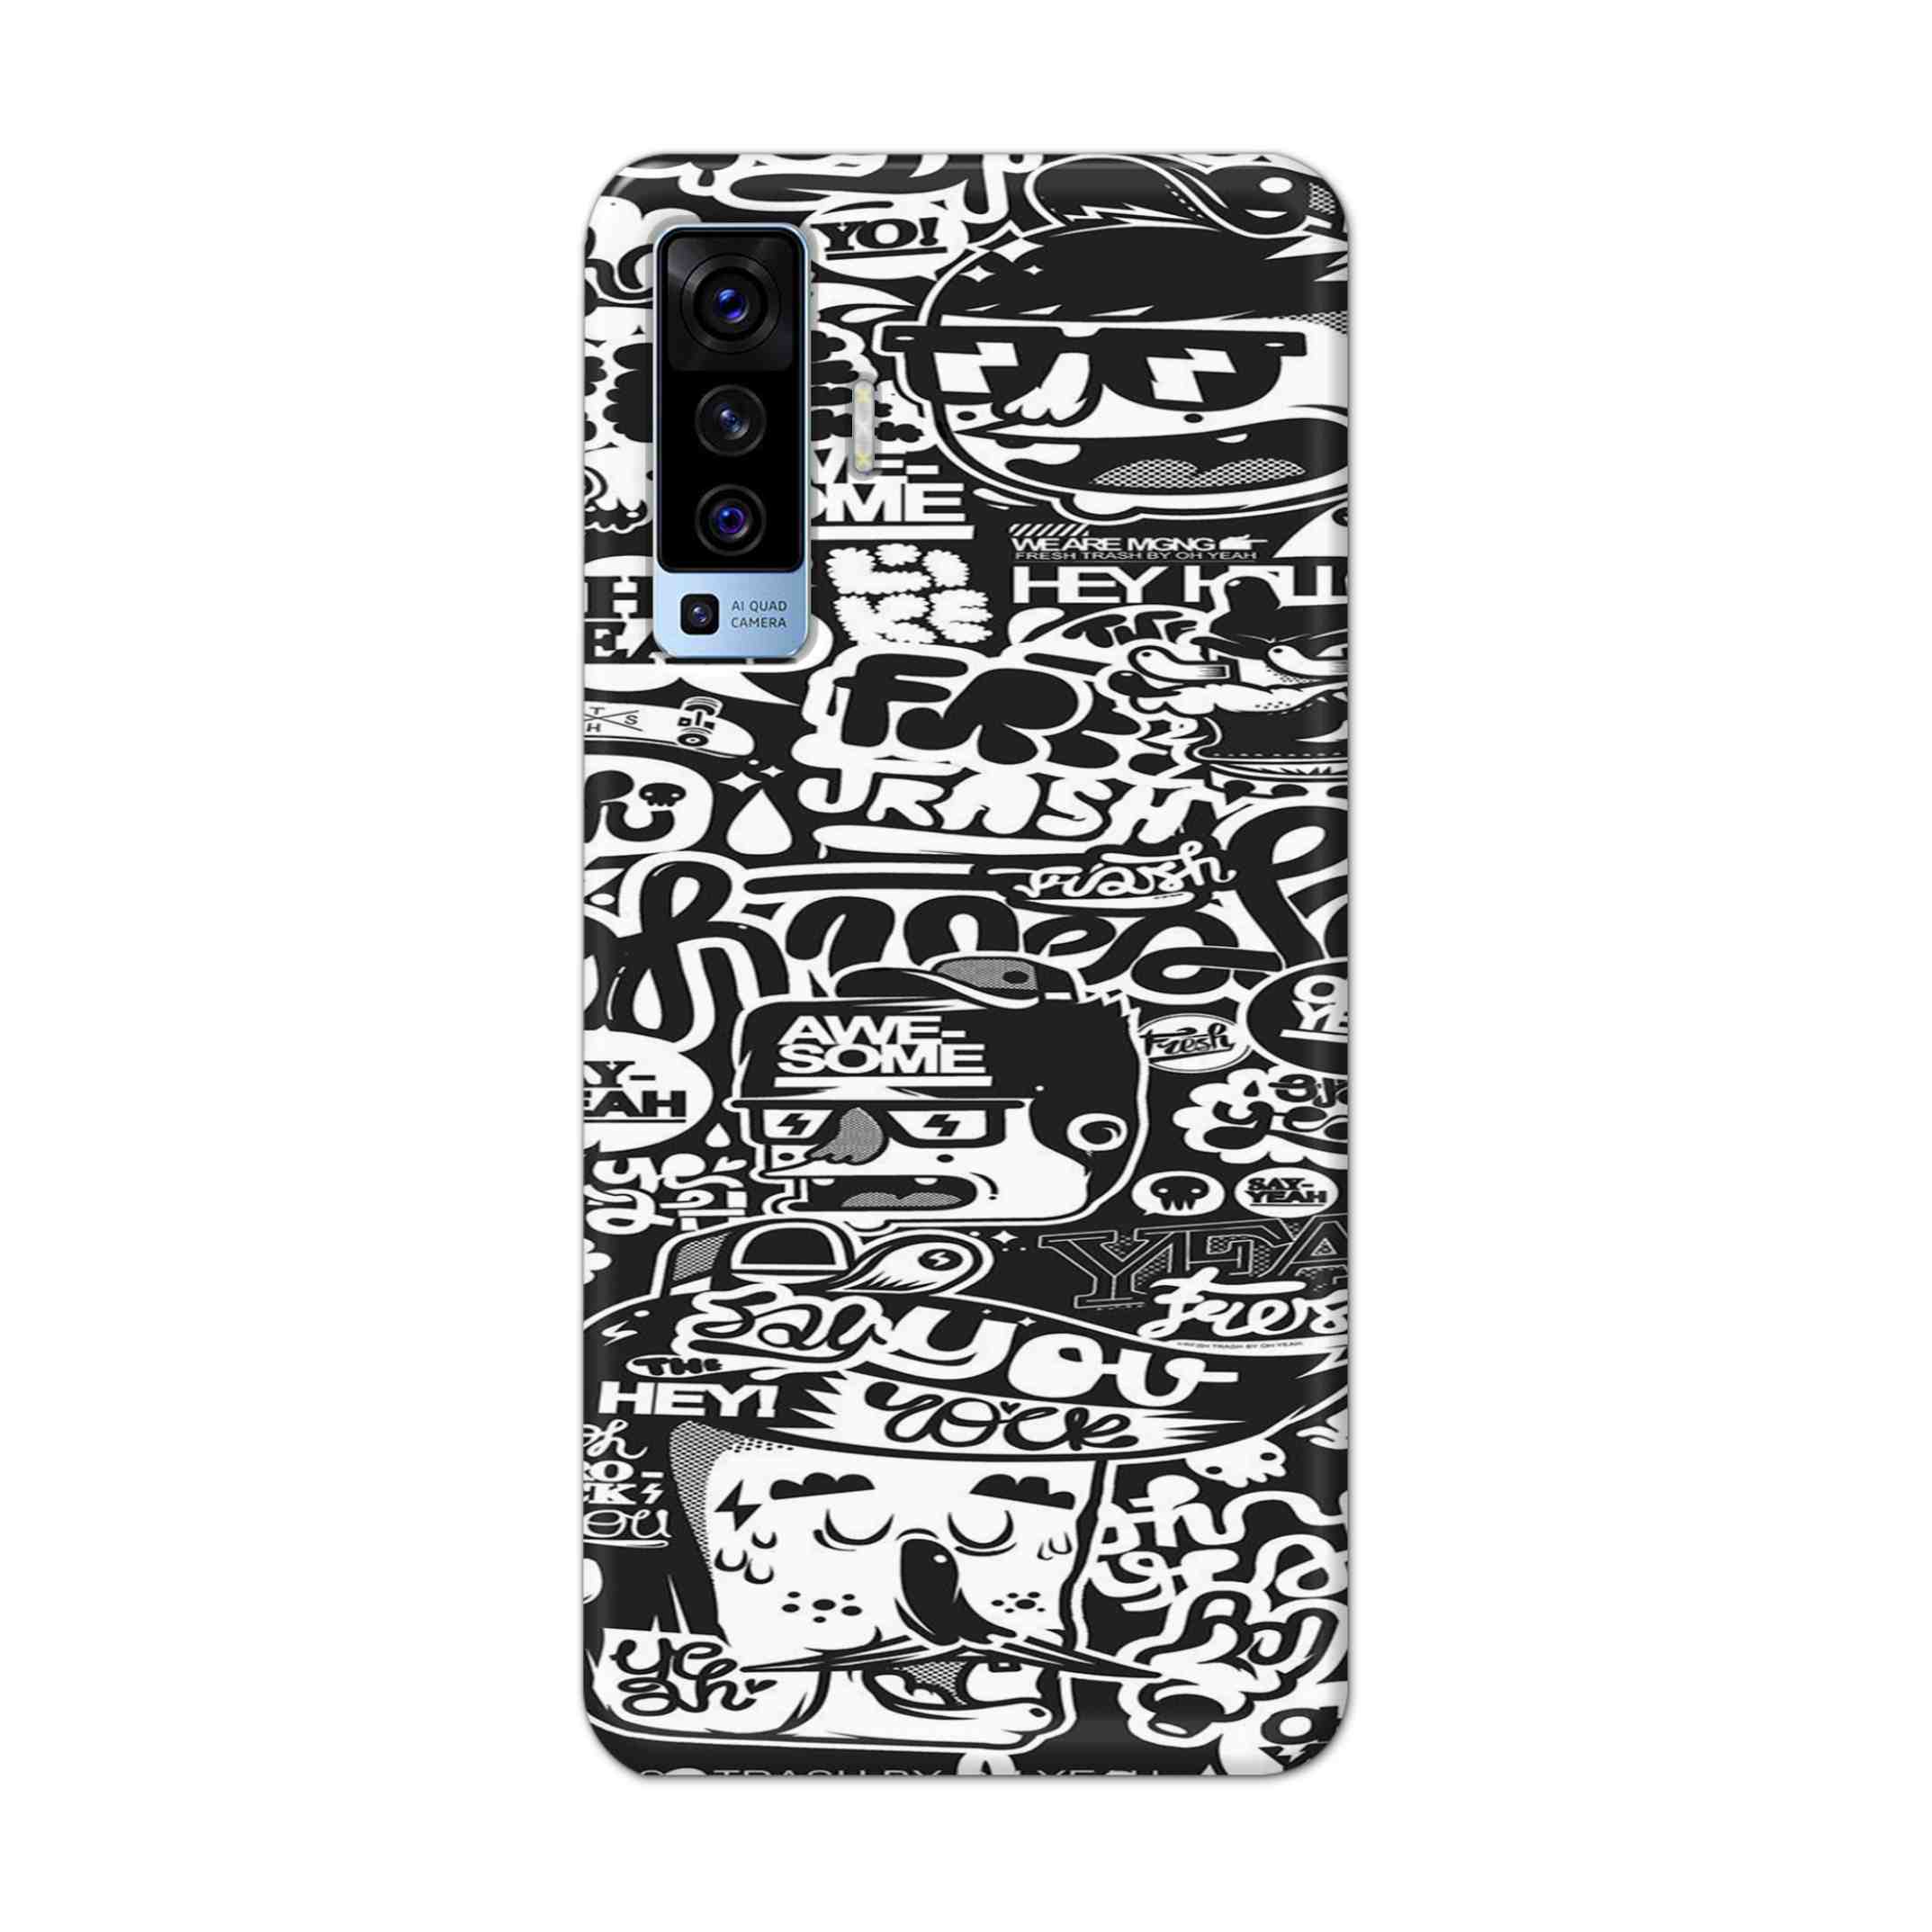 Buy Awesome Hard Back Mobile Phone Case Cover For Vivo X50 Online